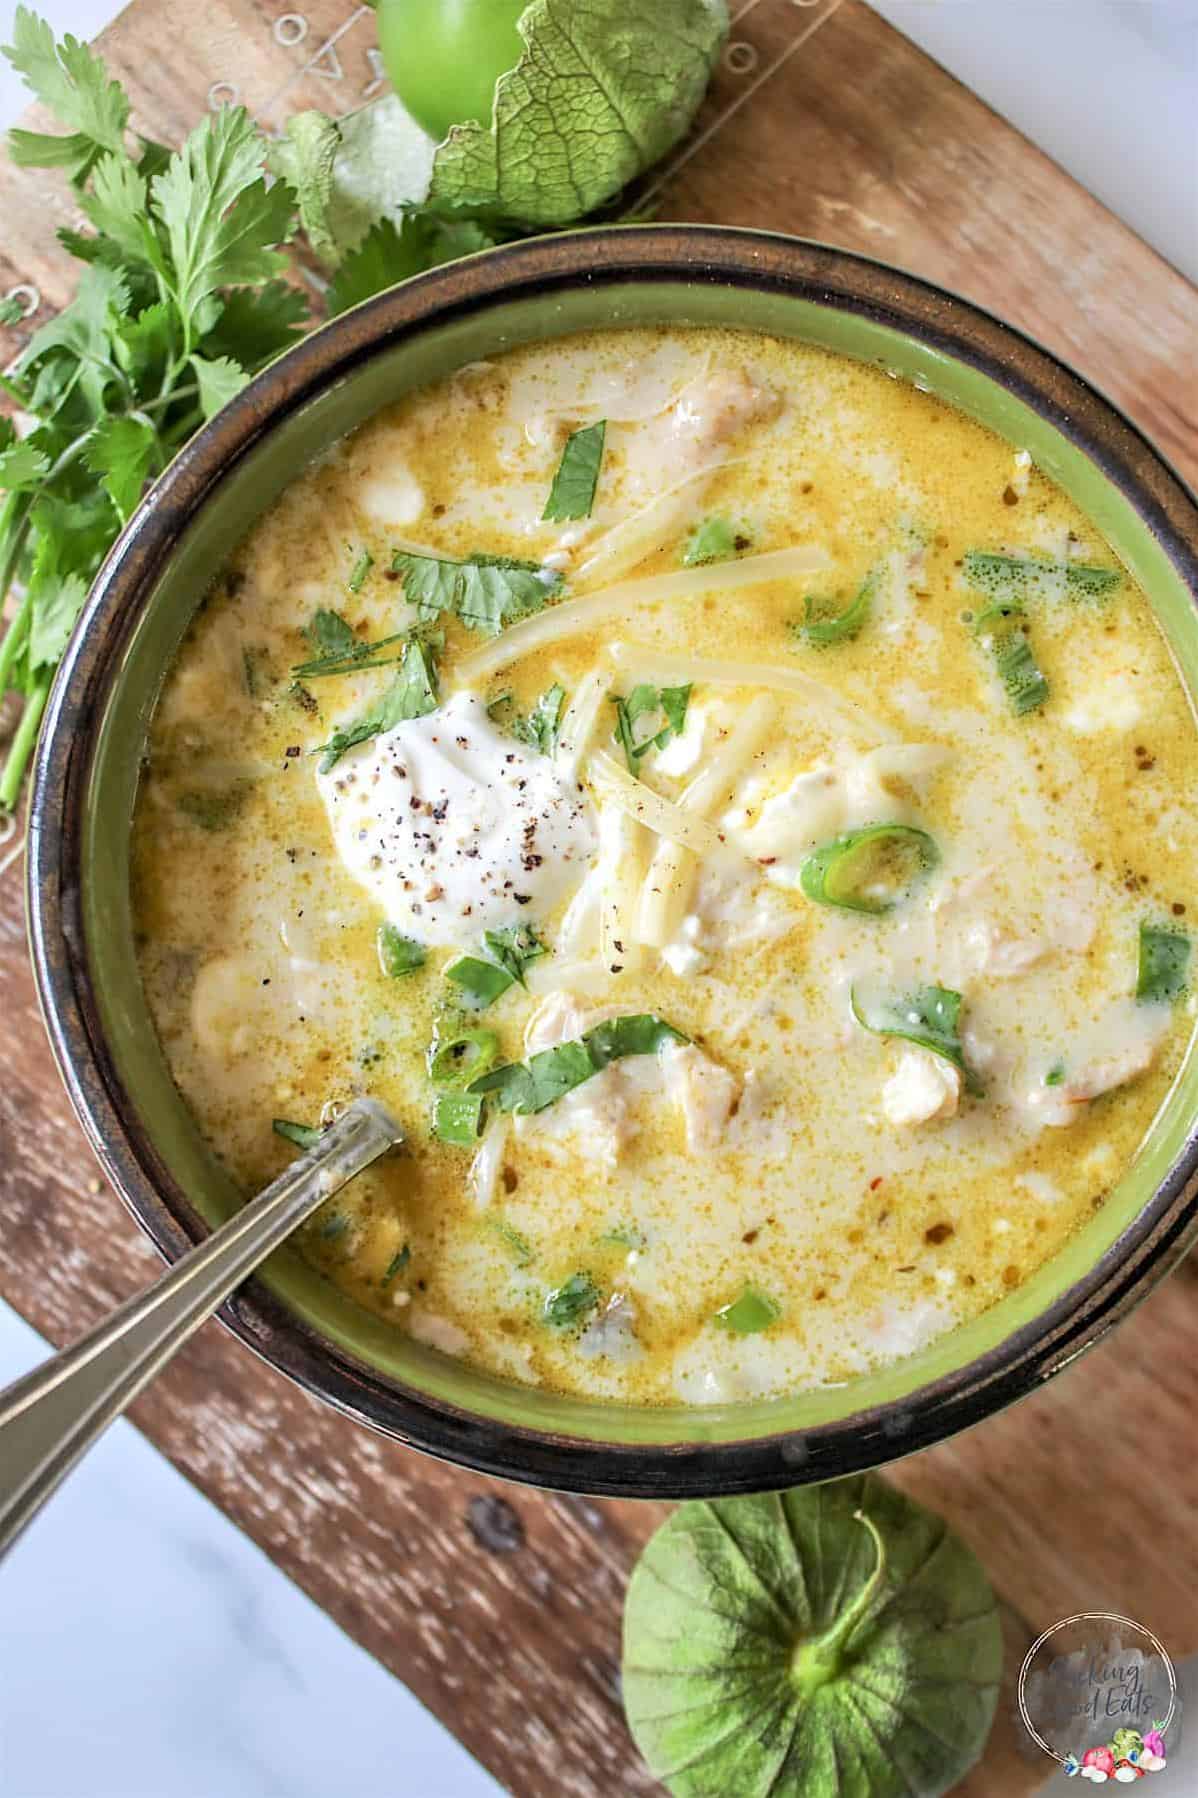 Flavorful Chicken Tortilla Soup You’ll Love Making at Home